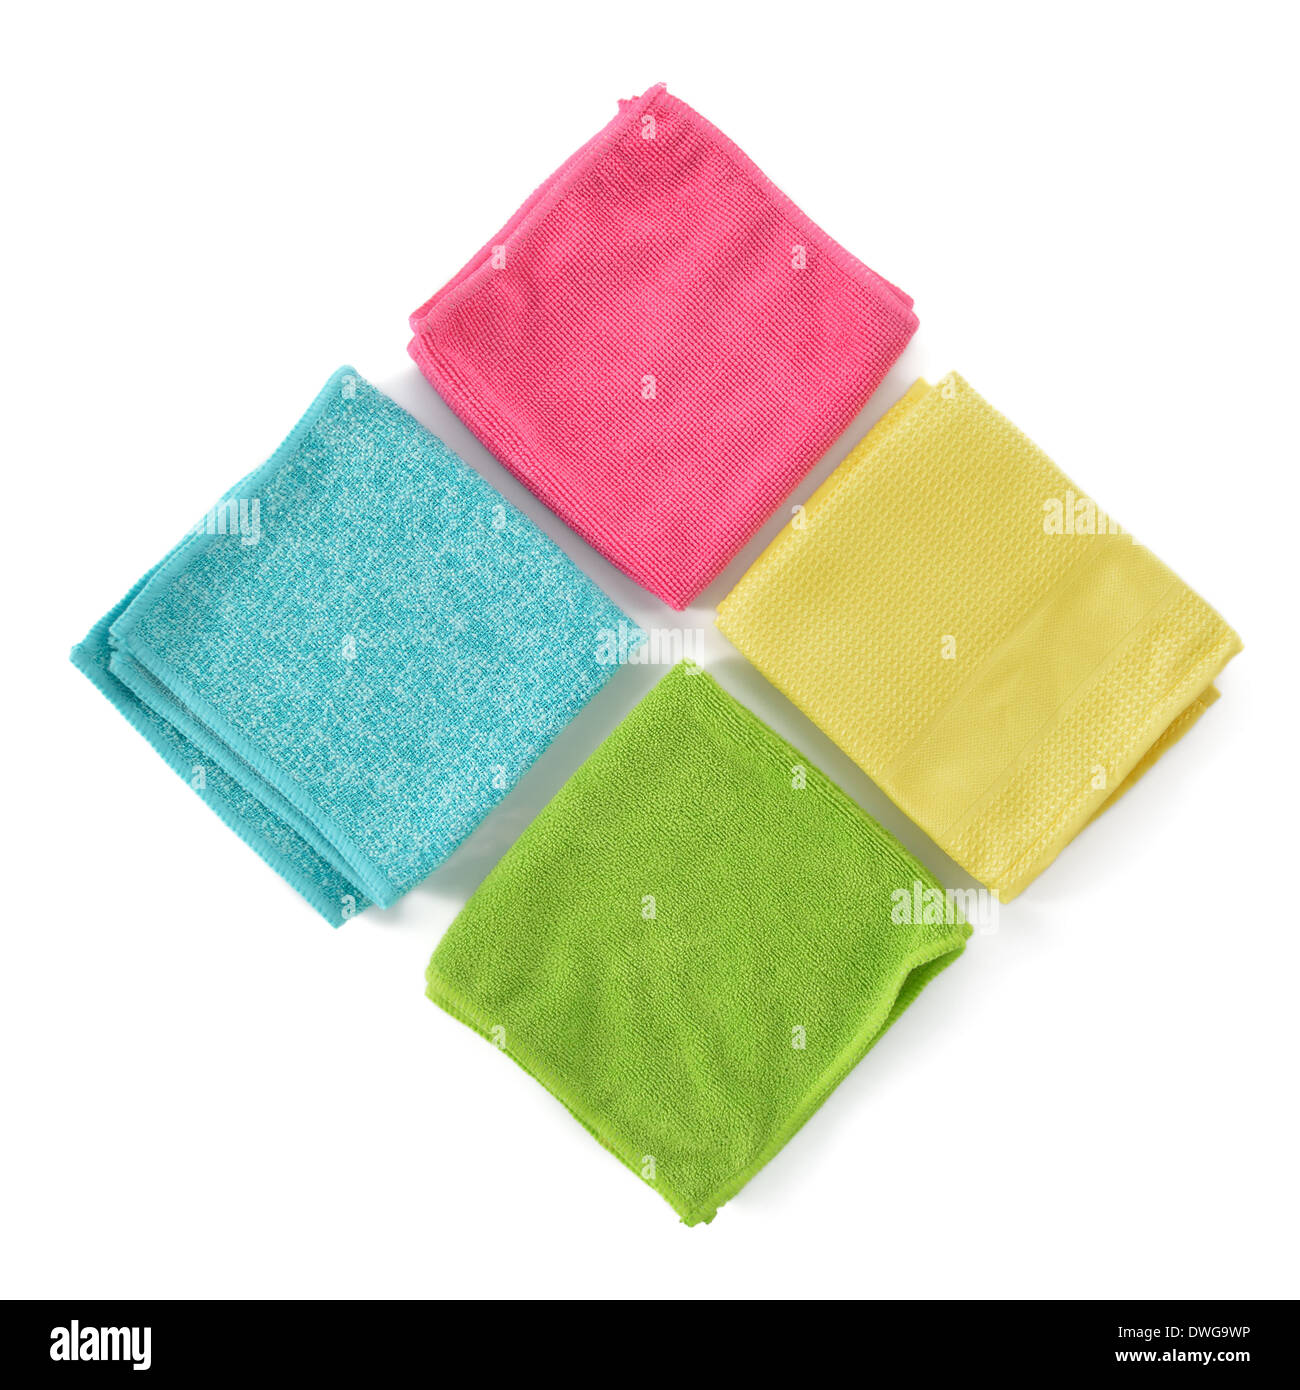 Set of colorful microfiber cleaning cloths isolated on white background. Cleaning cloth for different purposes. Stock Photo